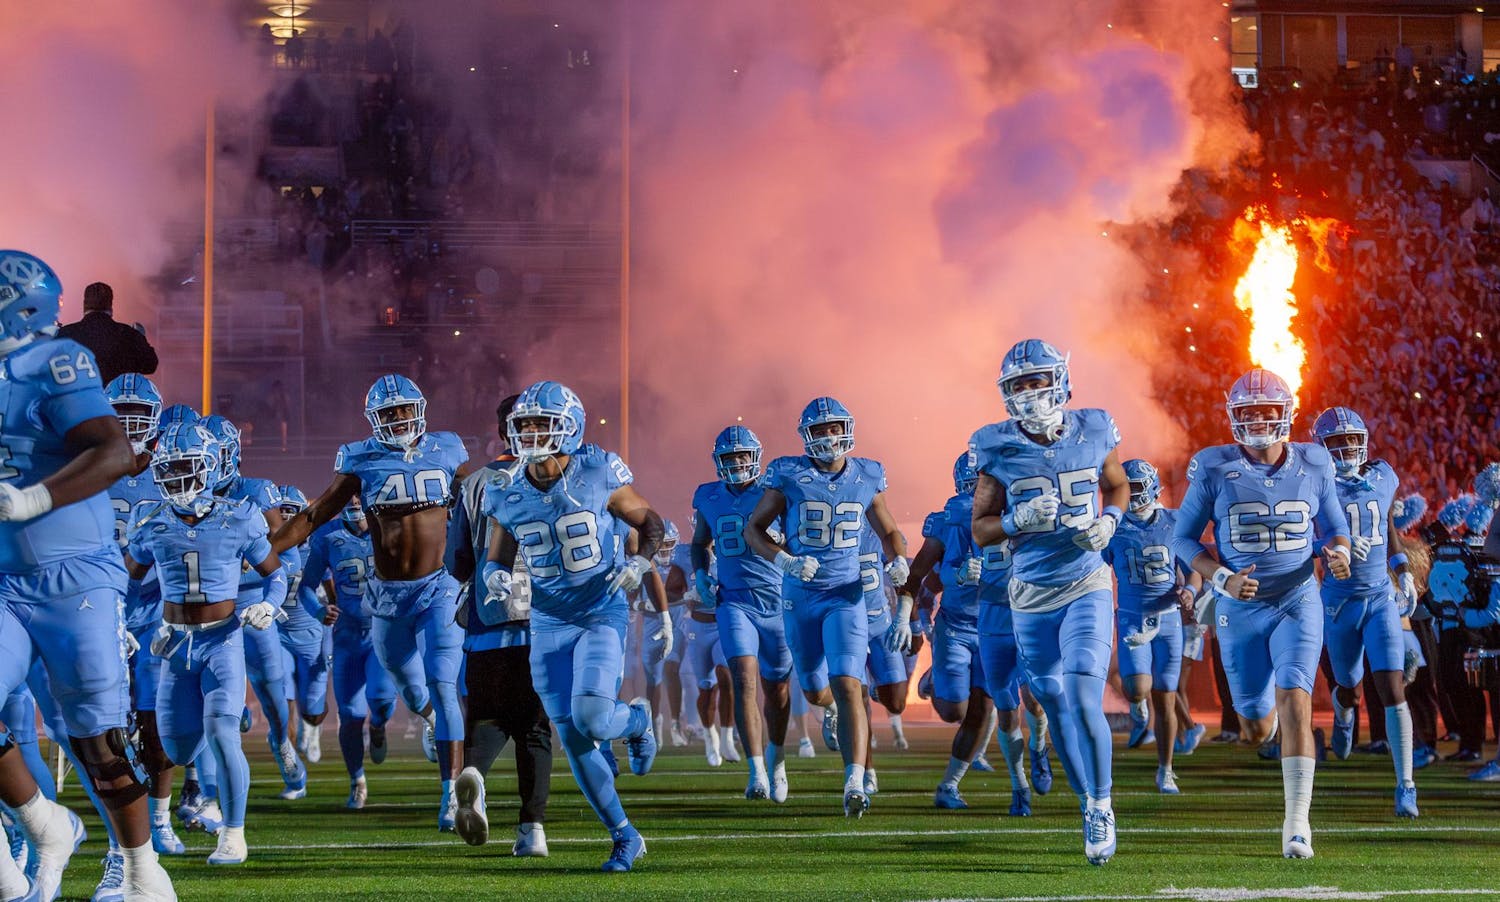 Gallery: No. 24 UNC football beats Duke, 47-45, in double-overtime homecoming victory